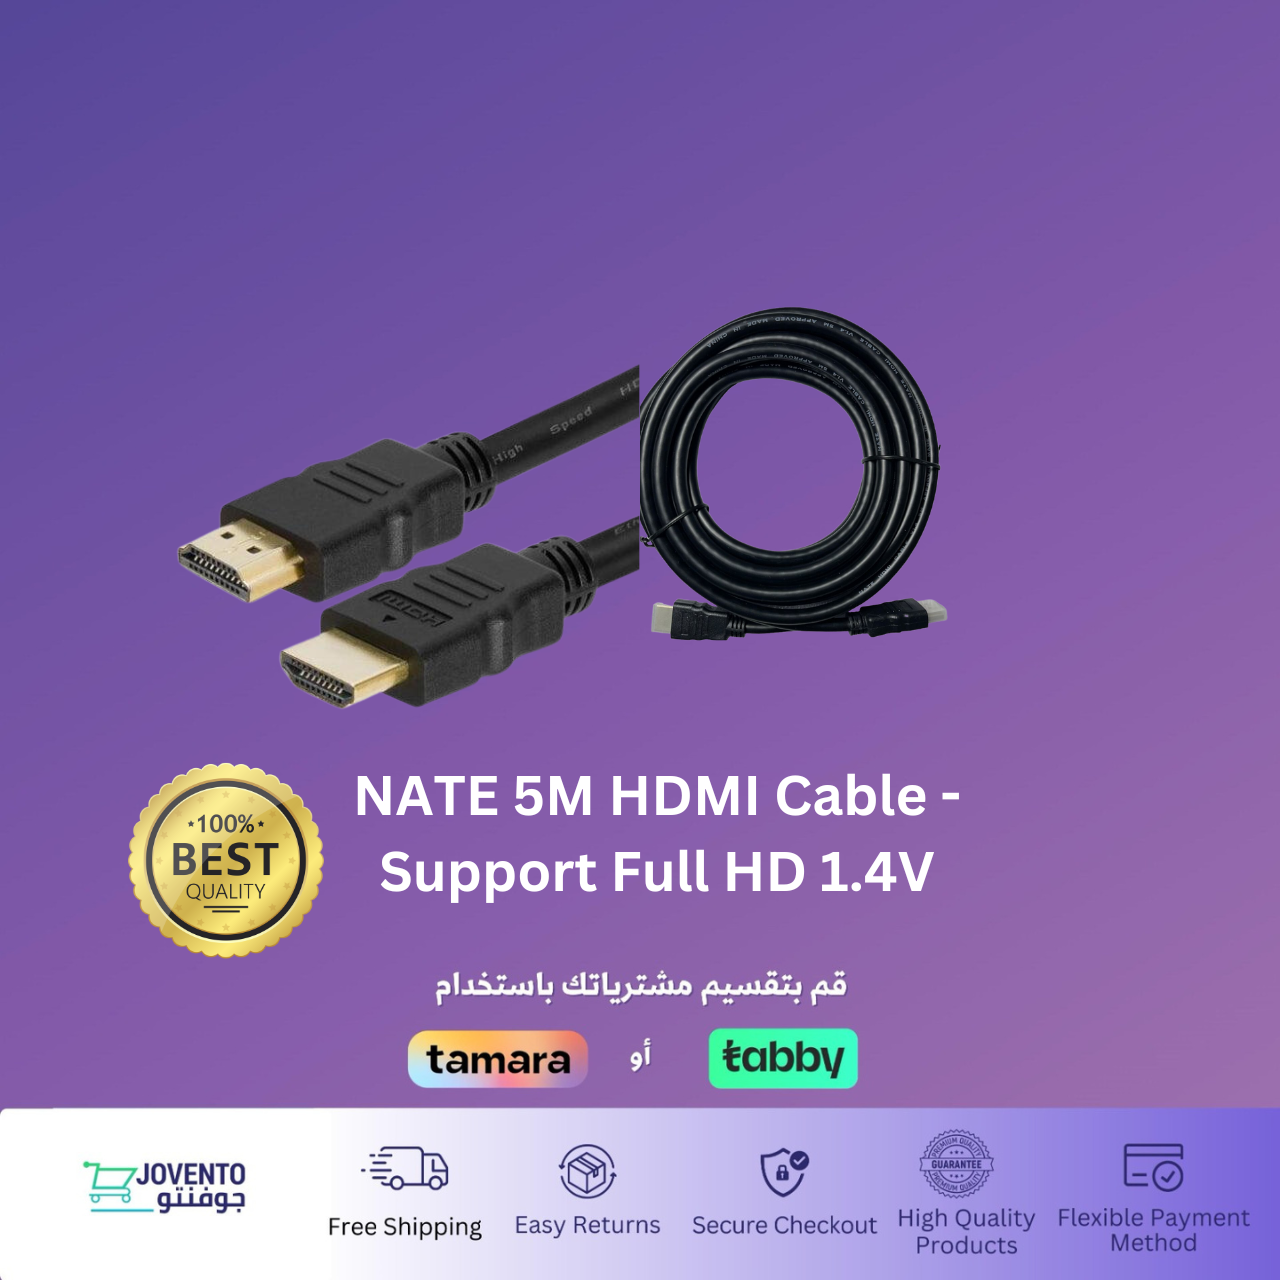 NATE 5M HDMI Cable - Support Full HD 1.4V